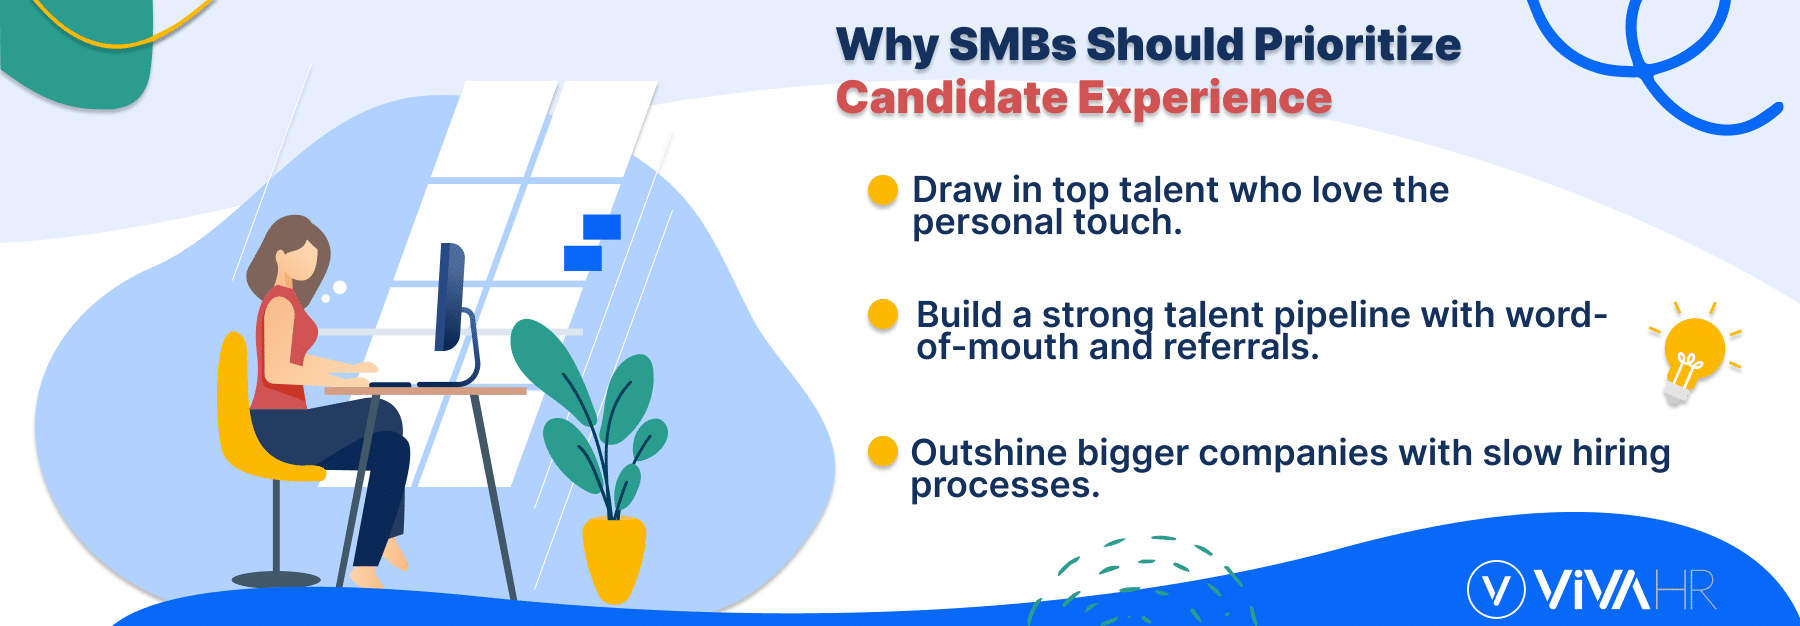 Why Smbs Should Learn How To Improve Candidate Experience